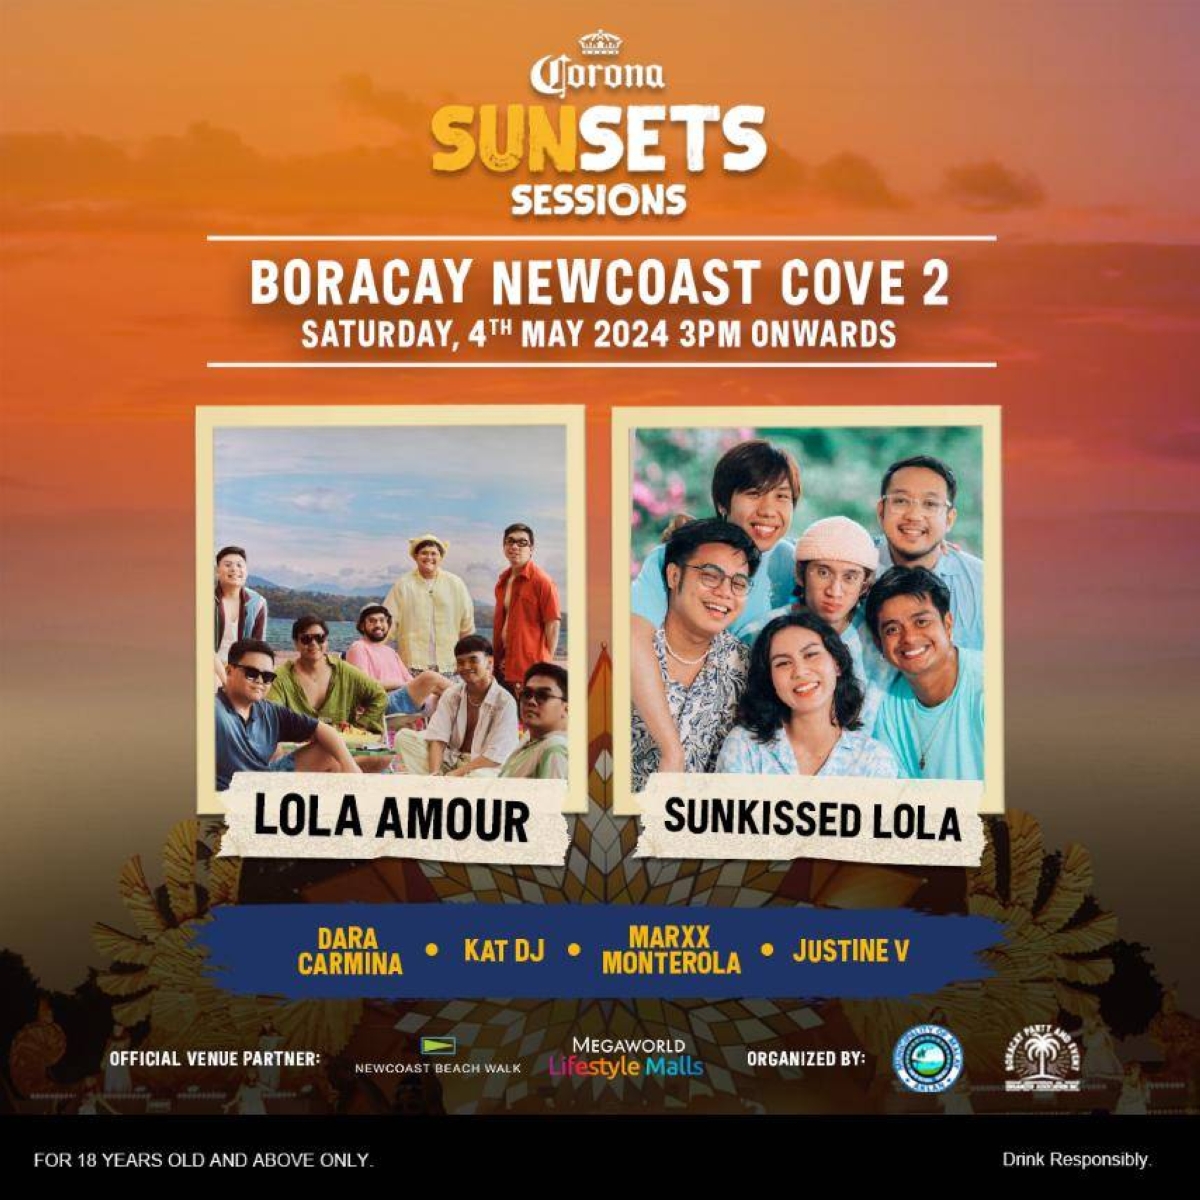 Get ready to experience an epic sunset escapade at Corona Sunsets Sessions. CONTRIBUTED POSTER